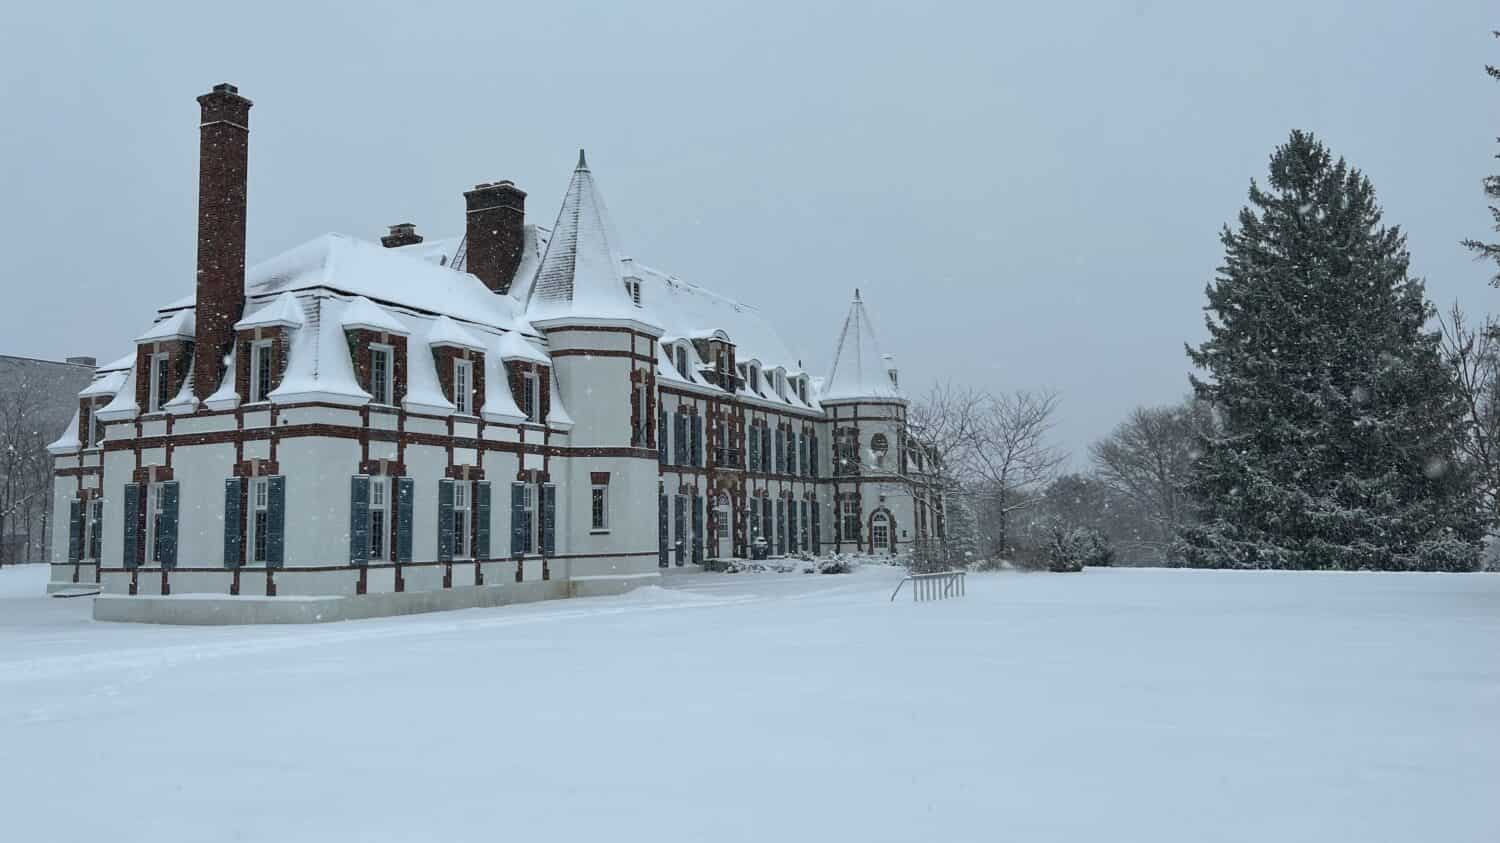 Le Chateau in Snow - Middlebury College